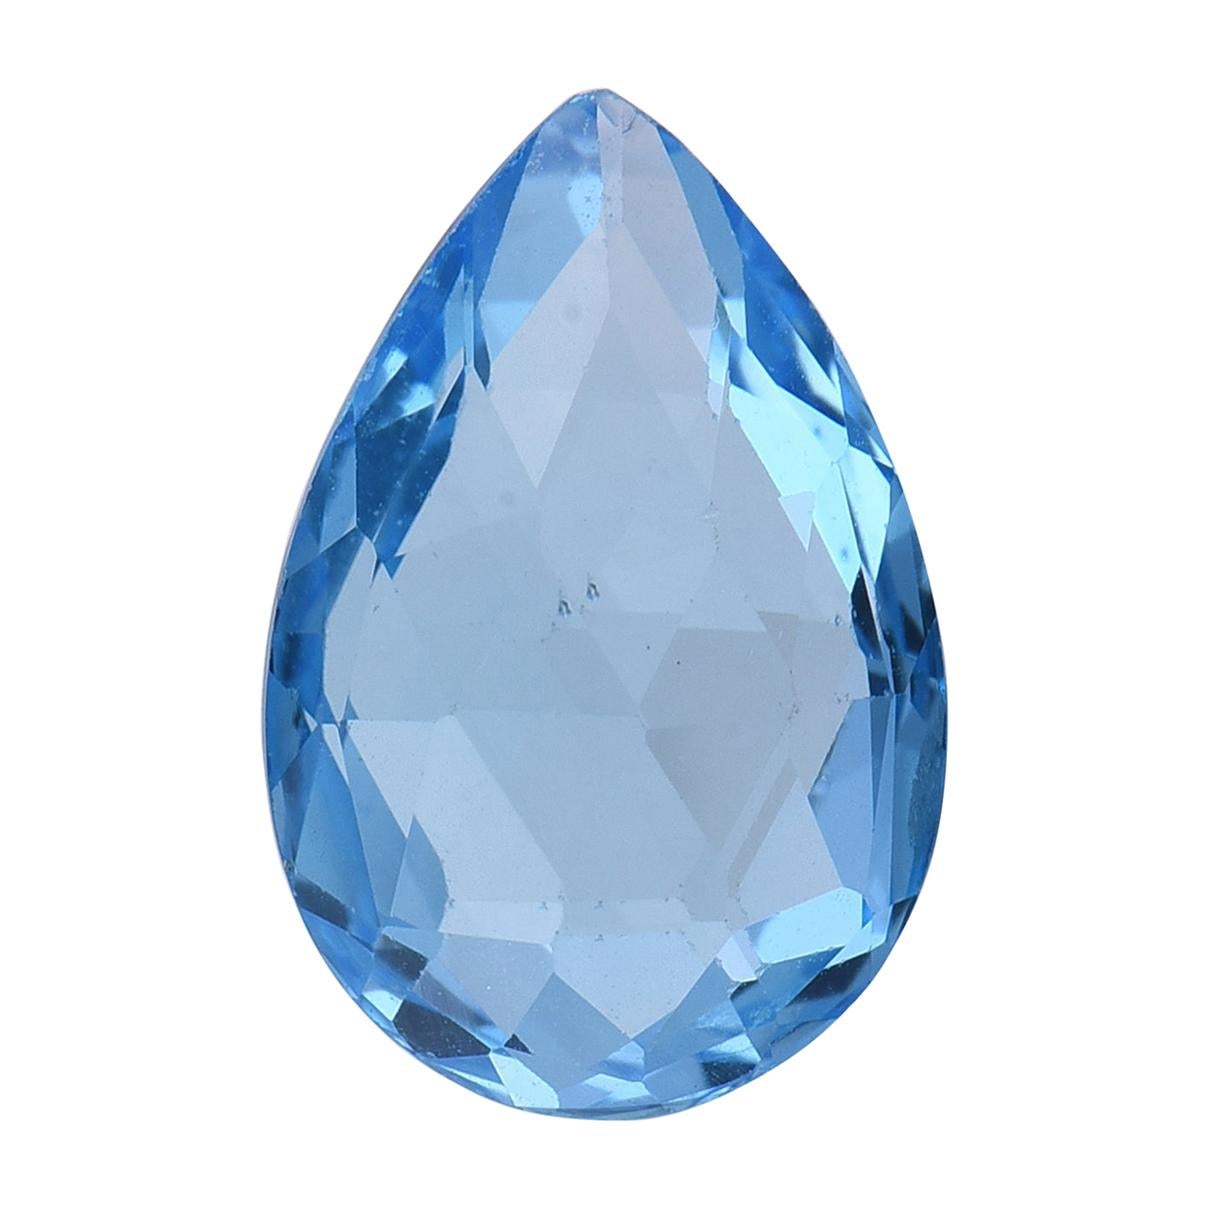 TJD Loose Natural Swiss Blue Topaz 5.15 Cts Pear Shape Gemstone for Ring/Pendant For Sale